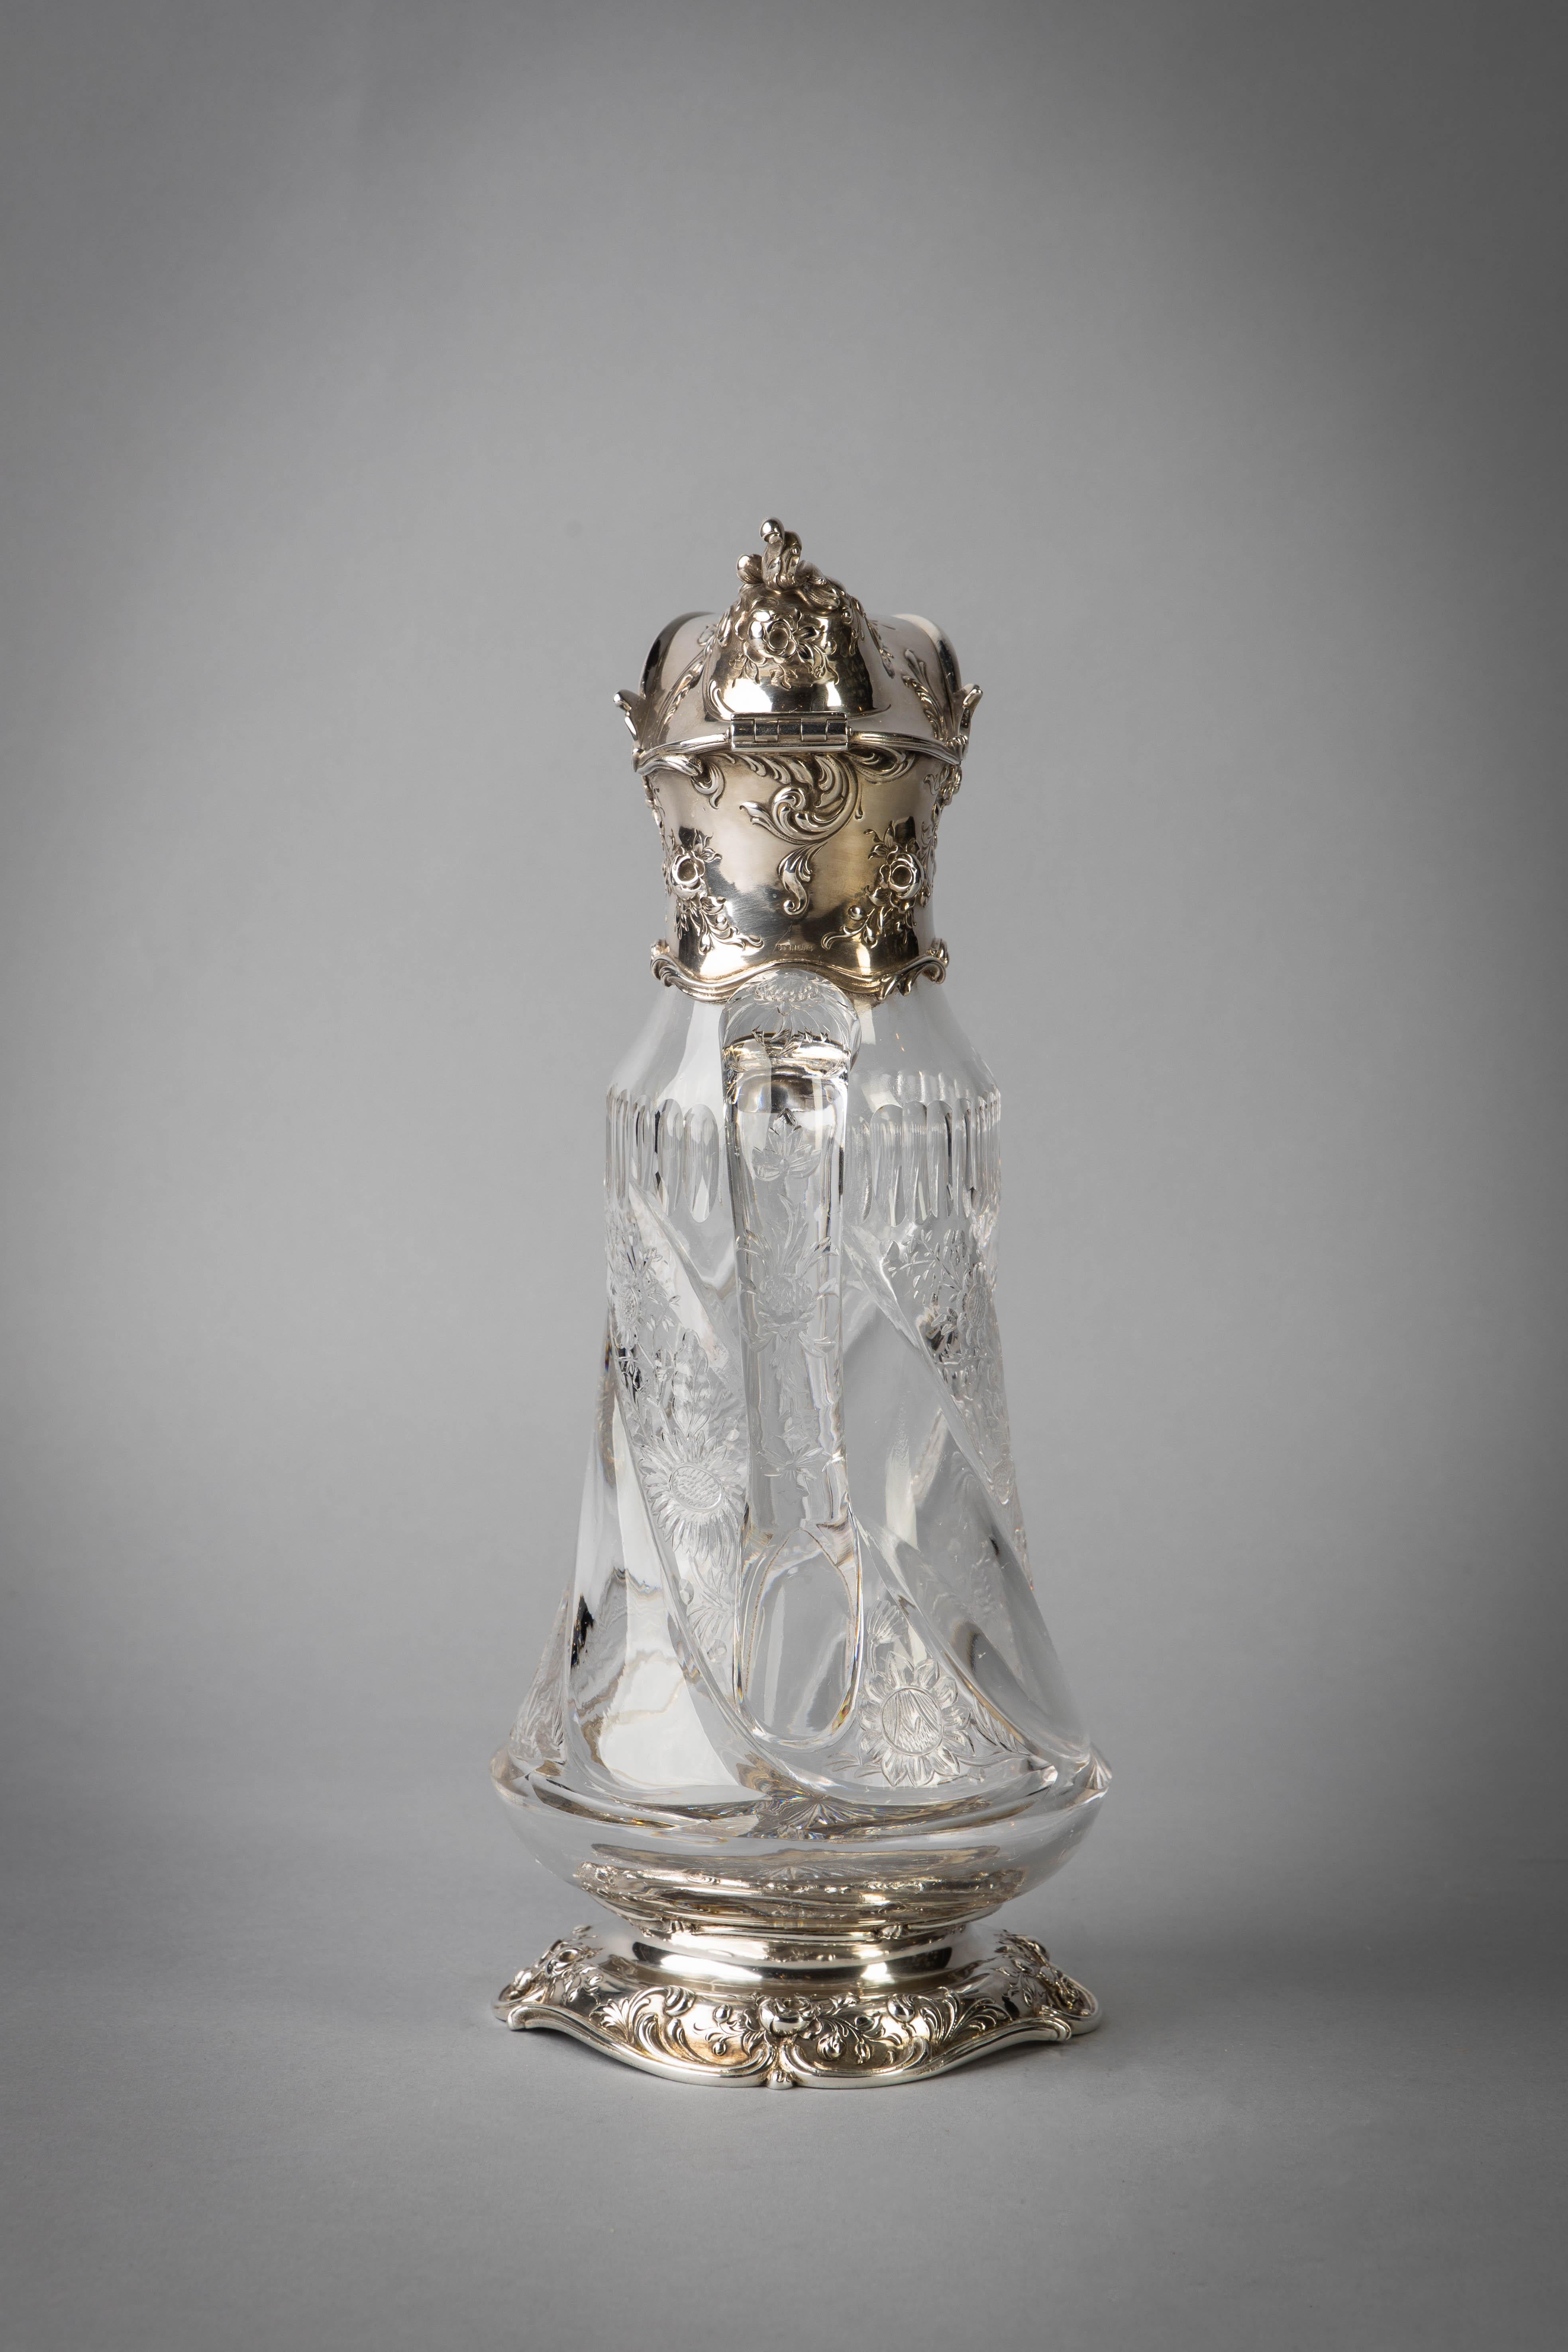 American Sterling Silver and Crystal Decanter, Gorham, circa 1900